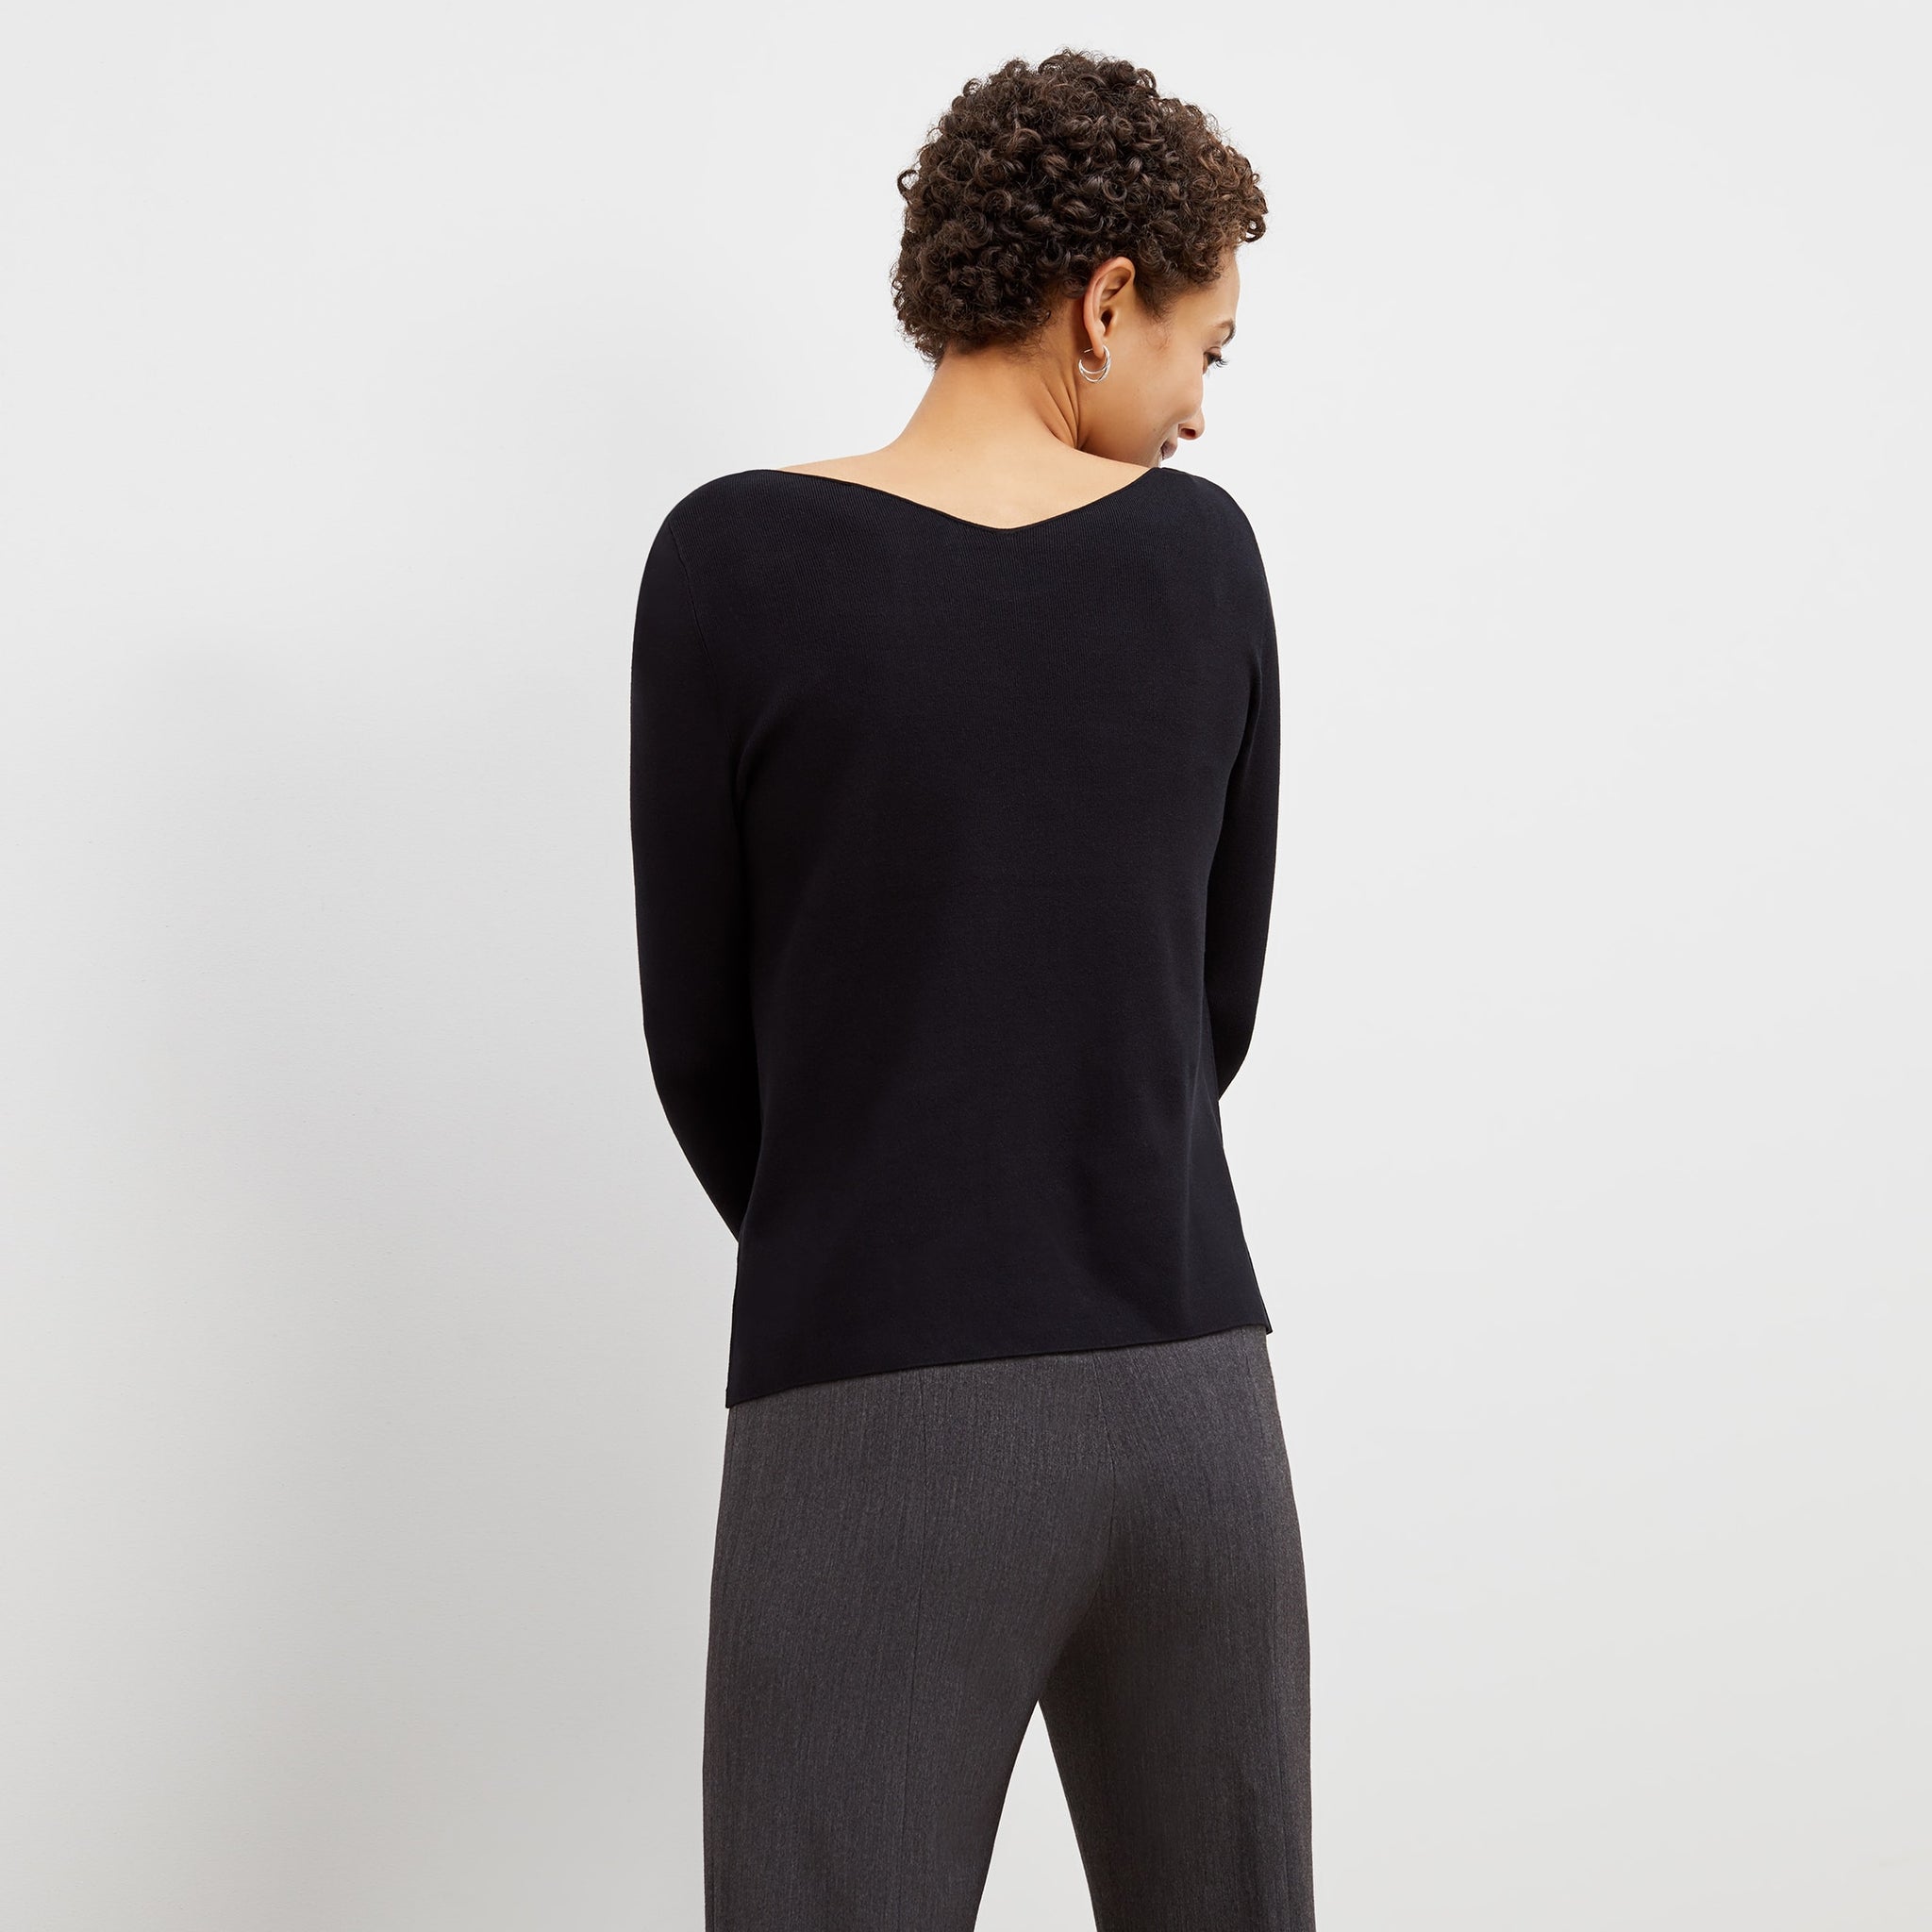 Back image of a woman standing wearing the celeste top in black